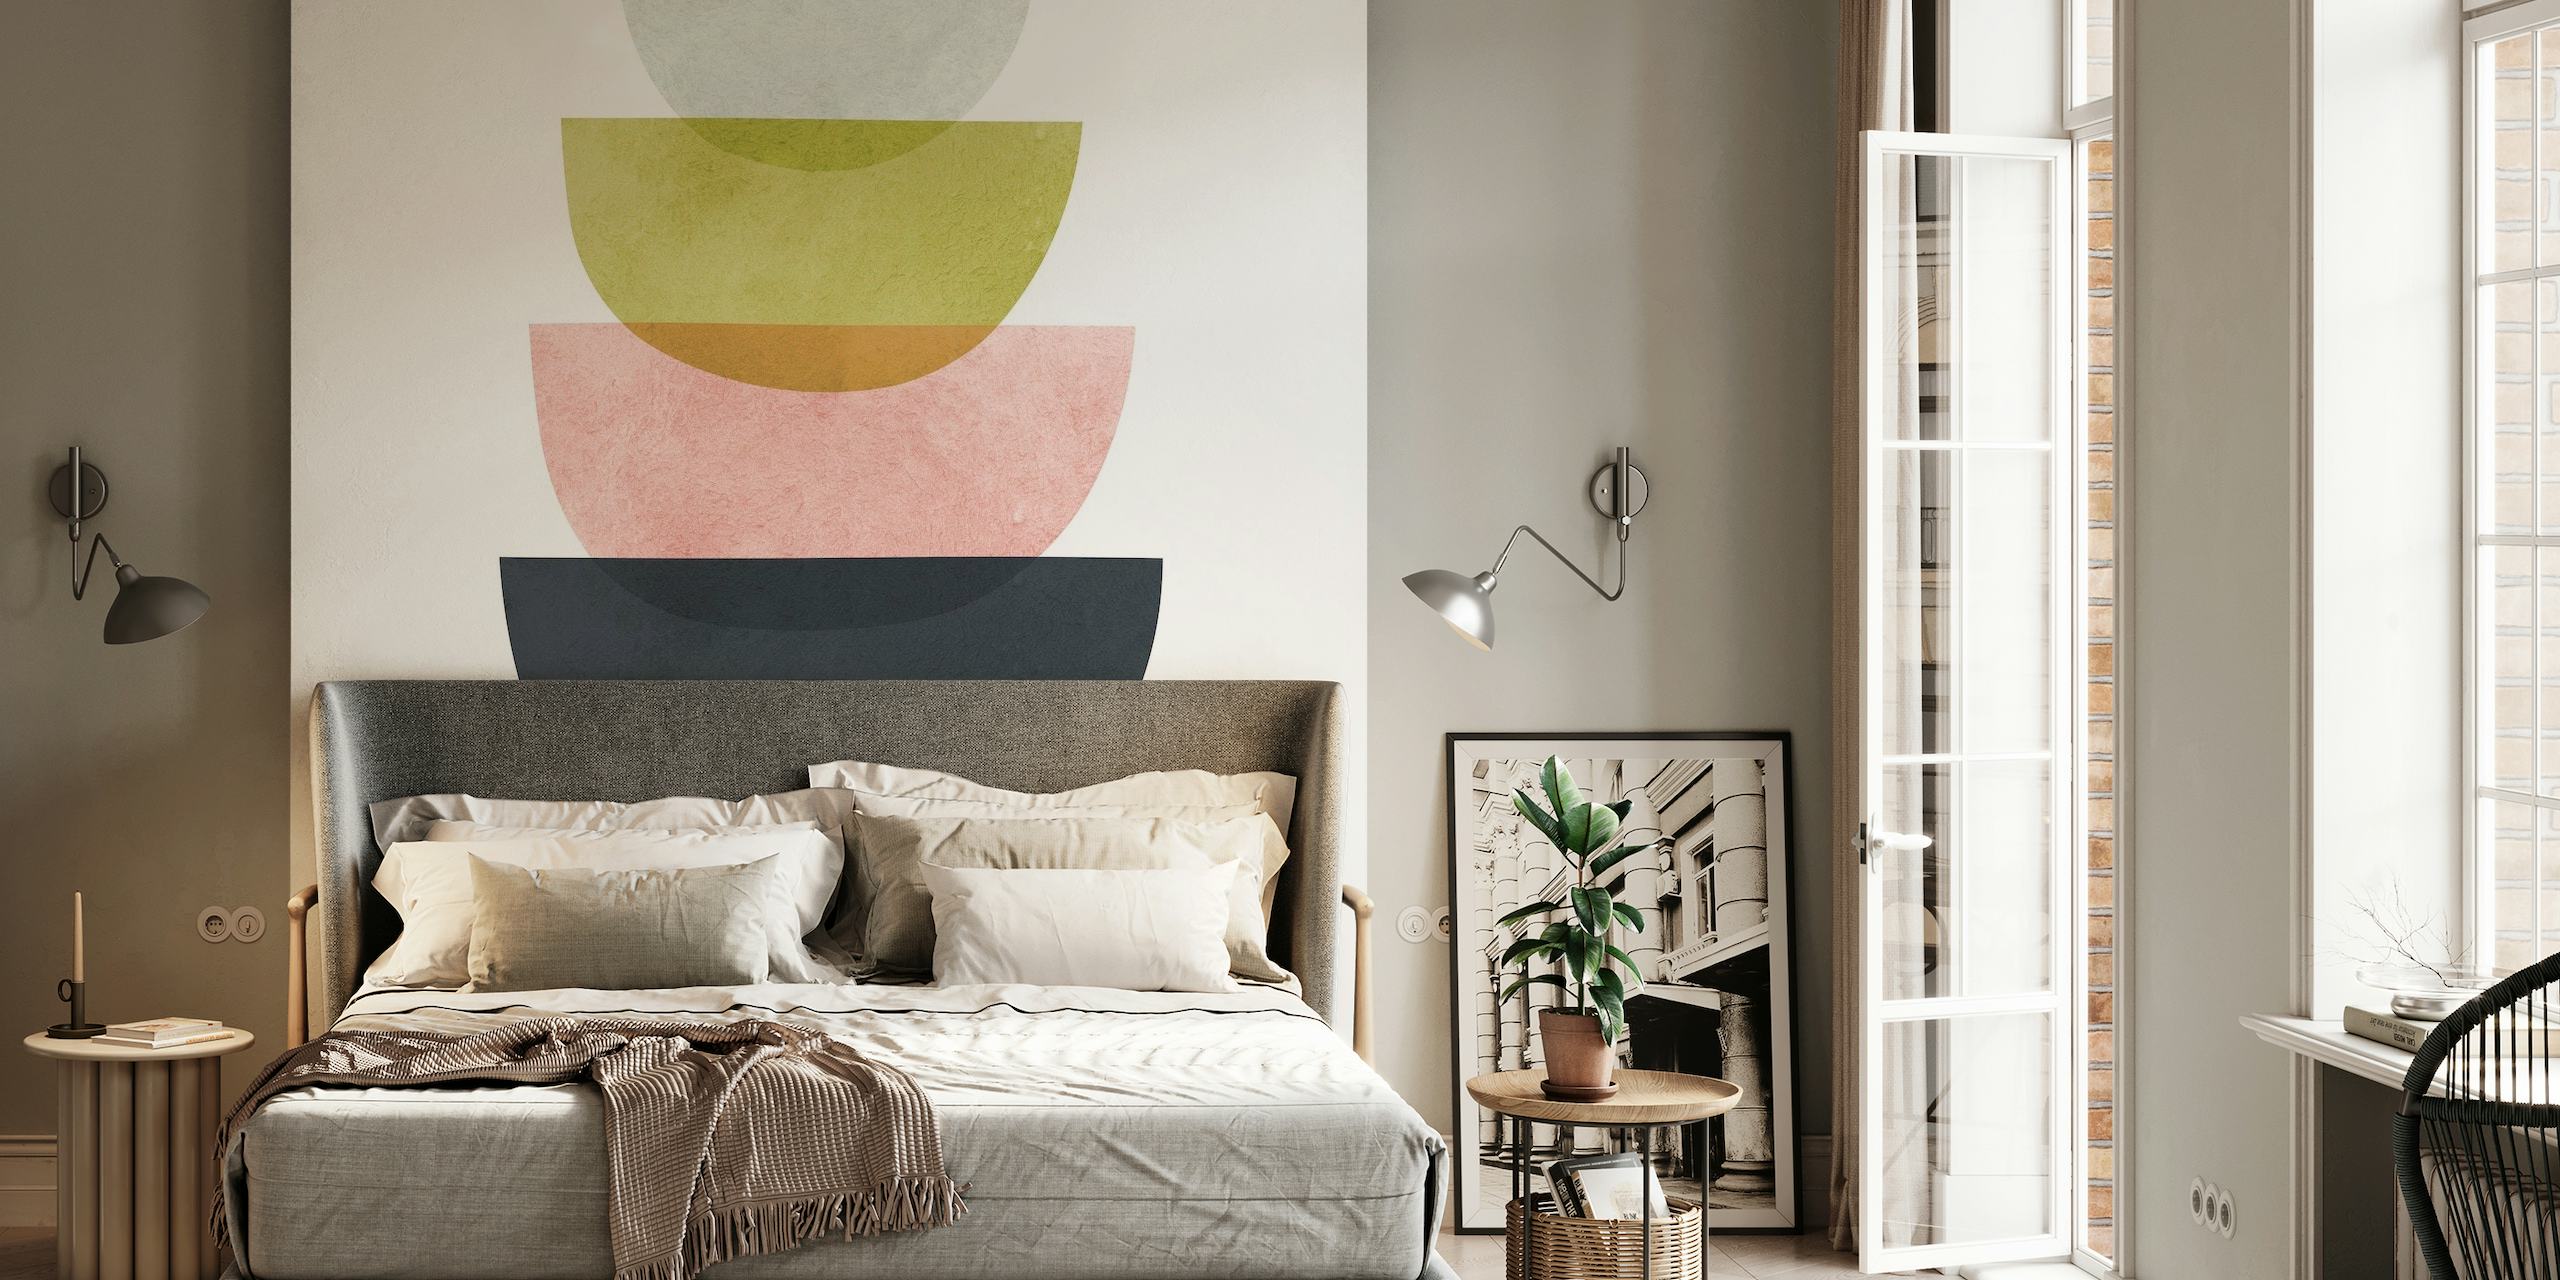 Colorful geometric abstract wall mural with overlapping semicircles in pastel shades.